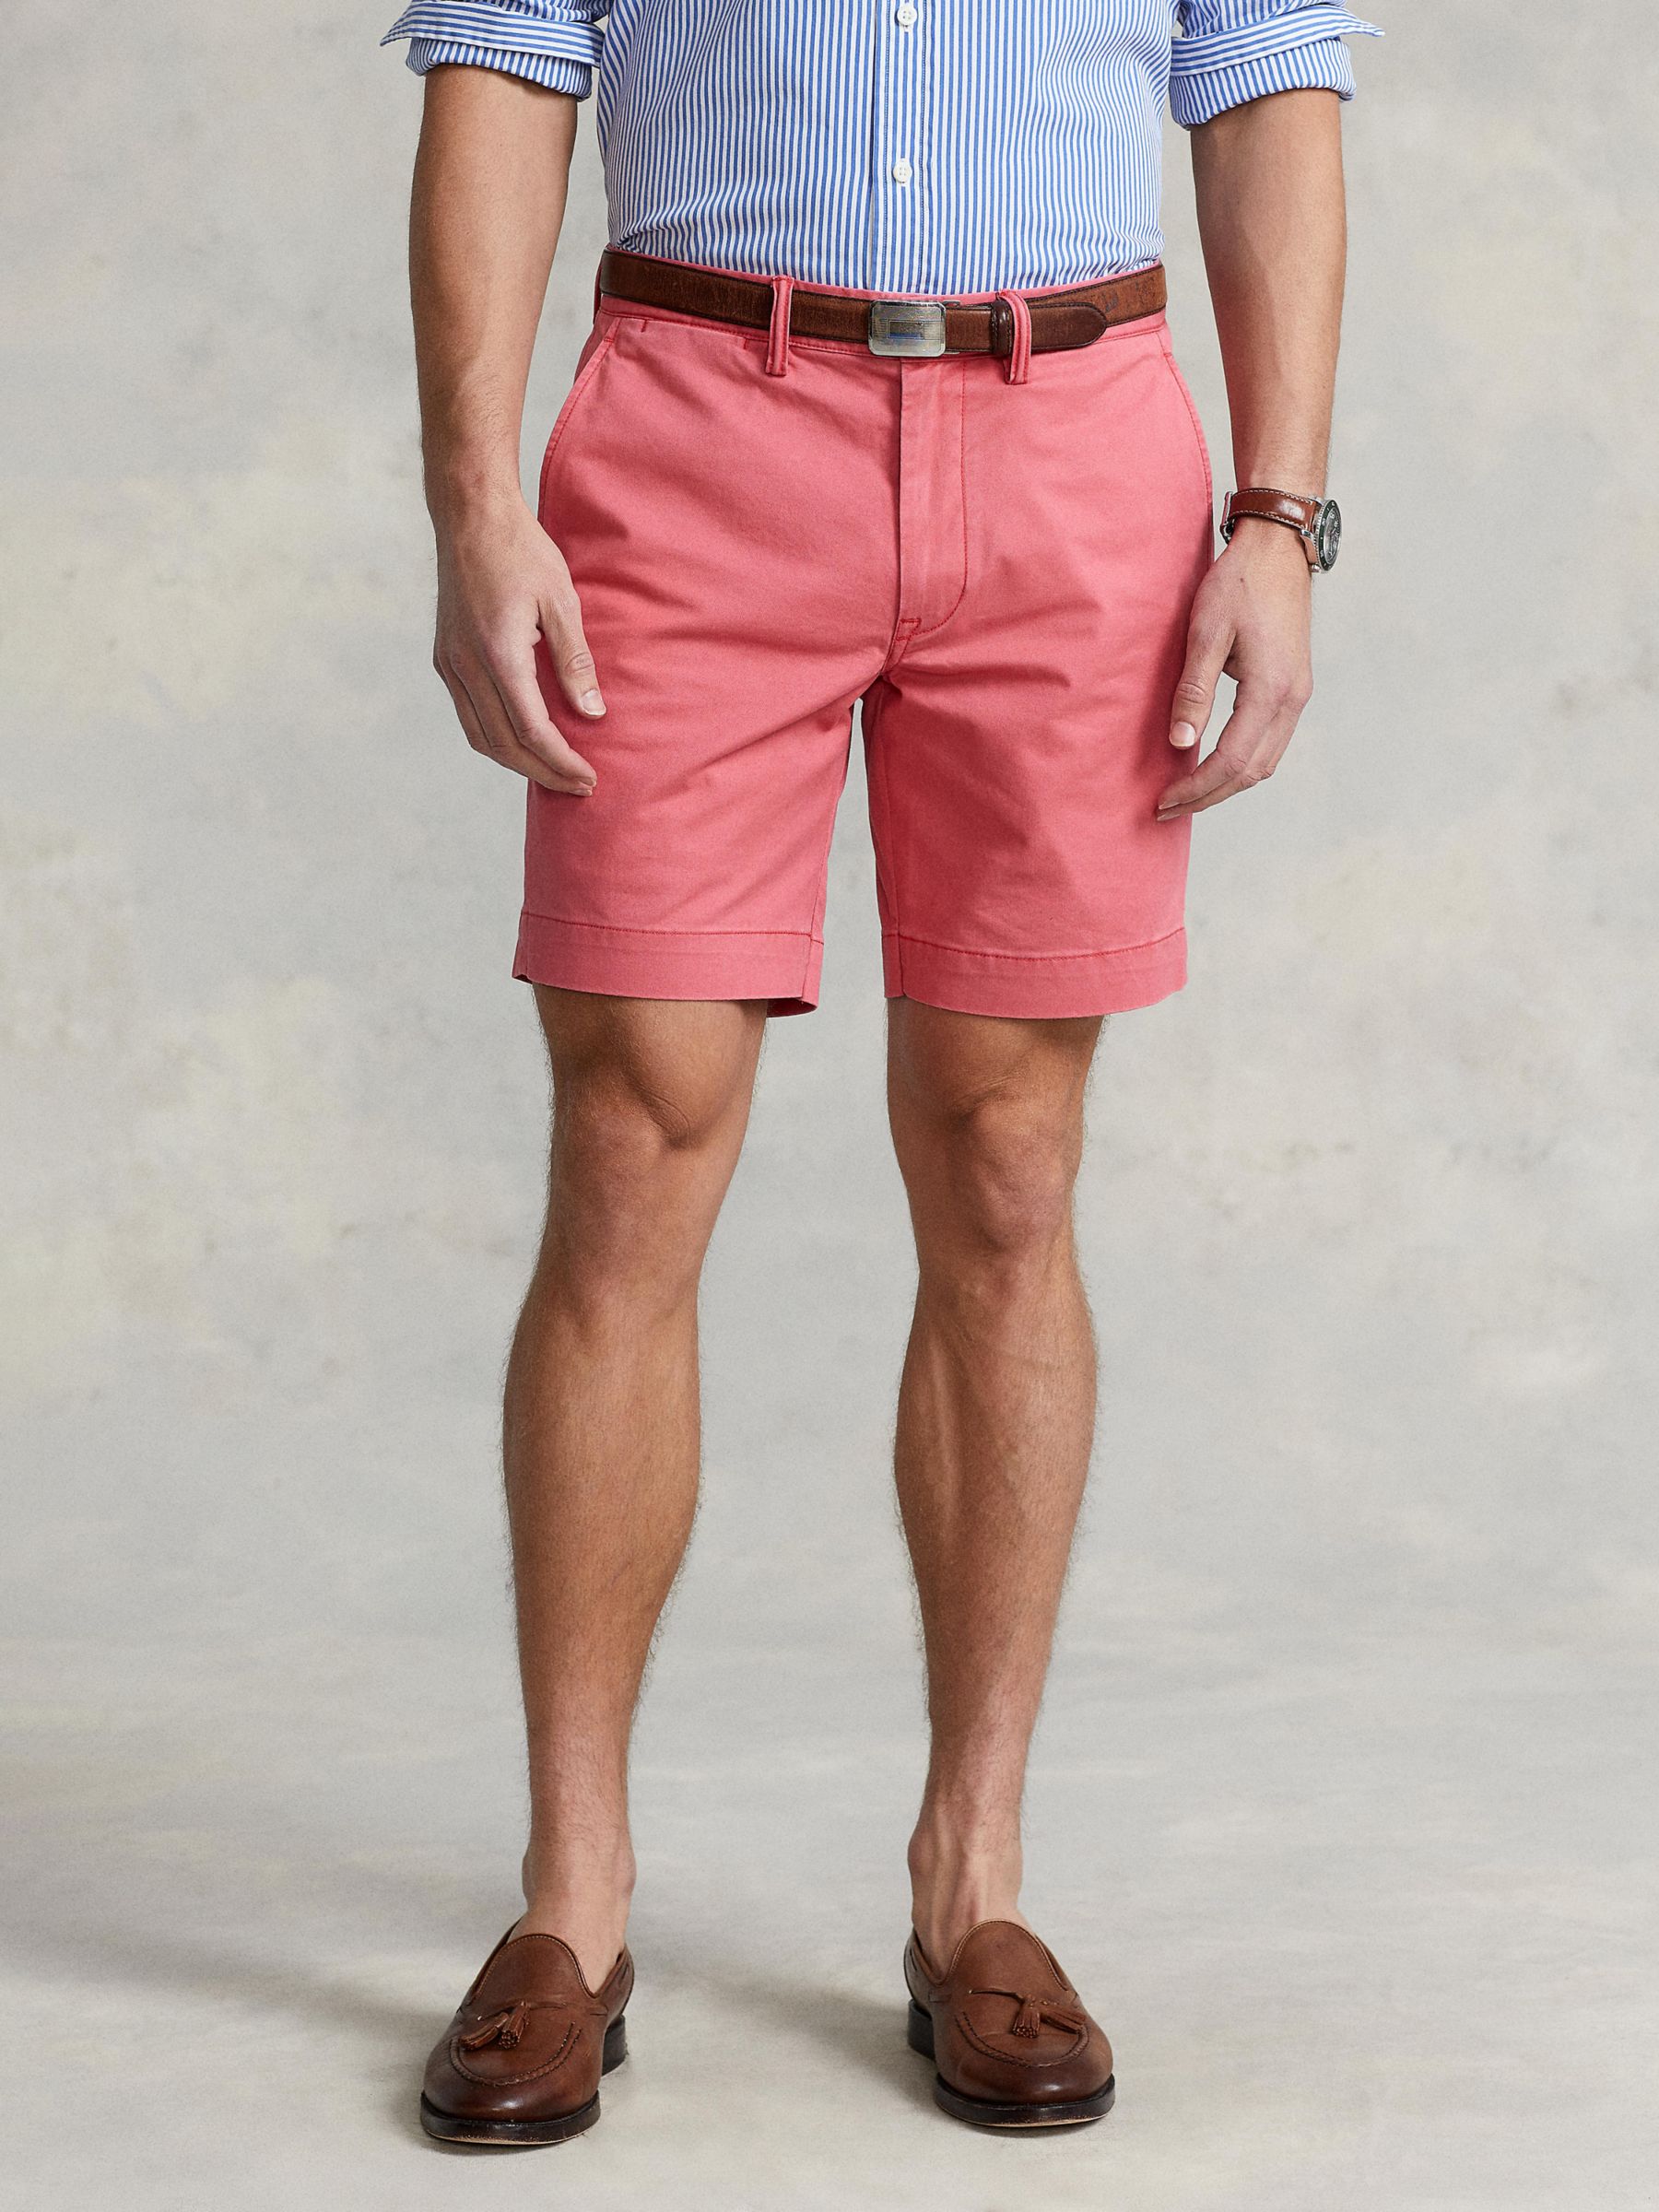 Ralph Lauren Stretch Straight Fit Chino Shorts, Nantucket Red, 38R